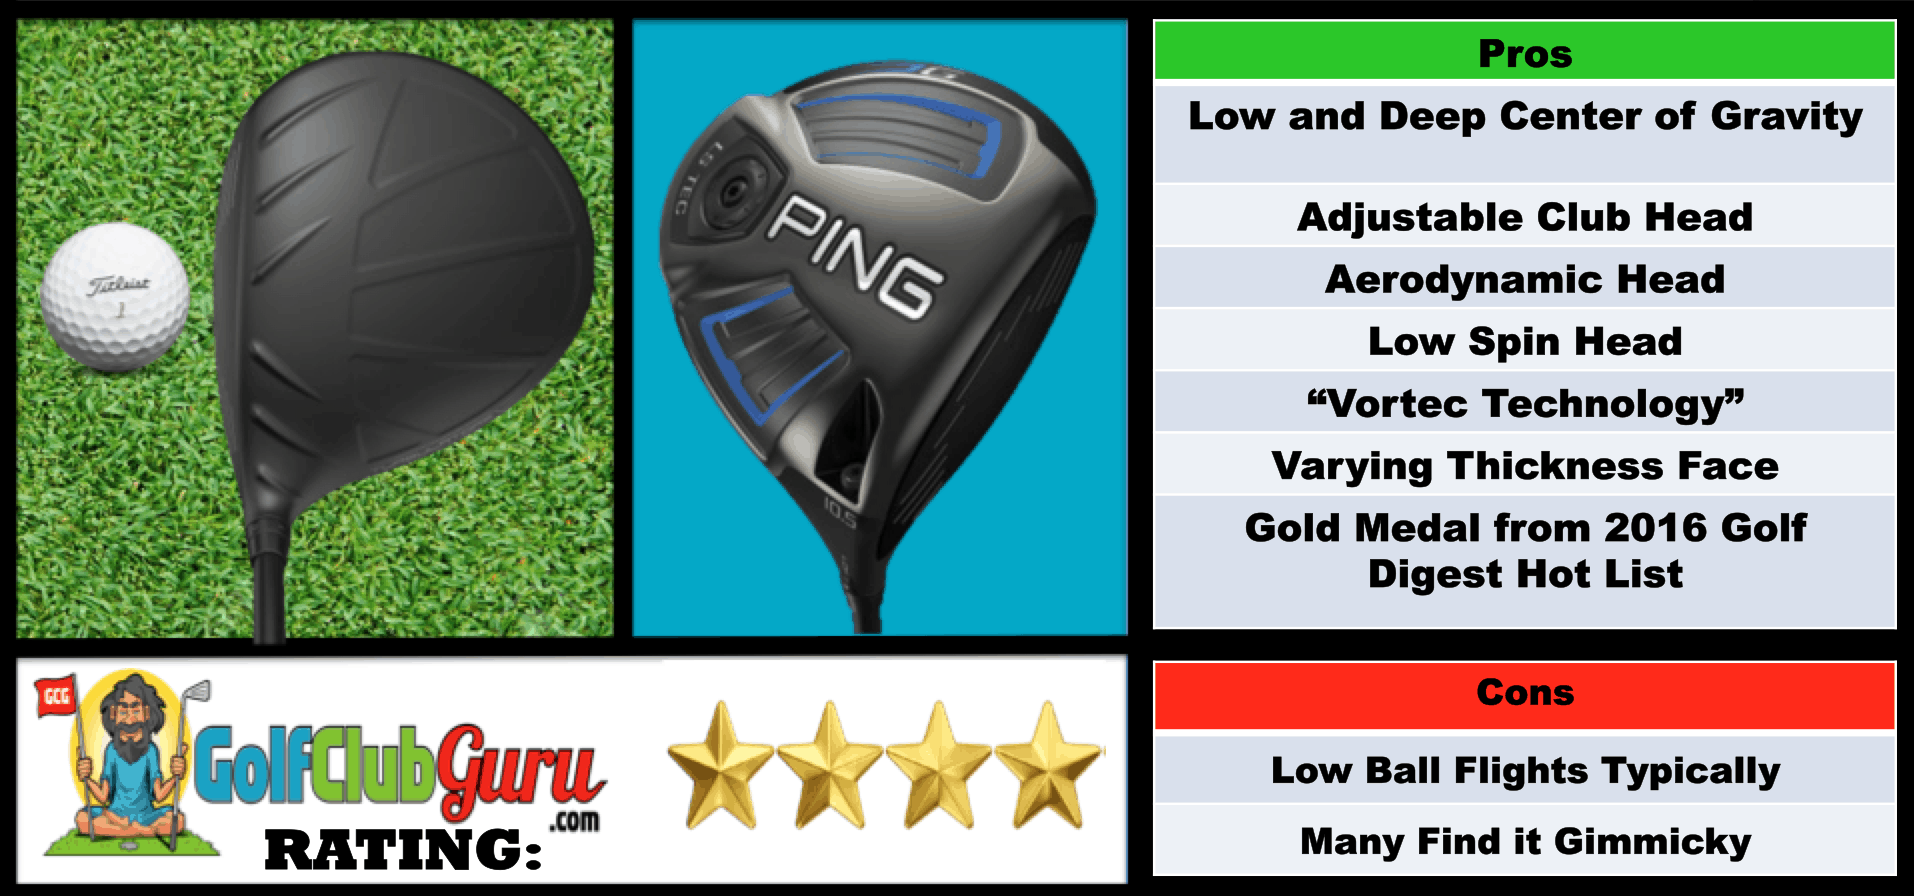 Photos, Review, Ranking, Pros, and Cons of Ping G LS Tec Driver